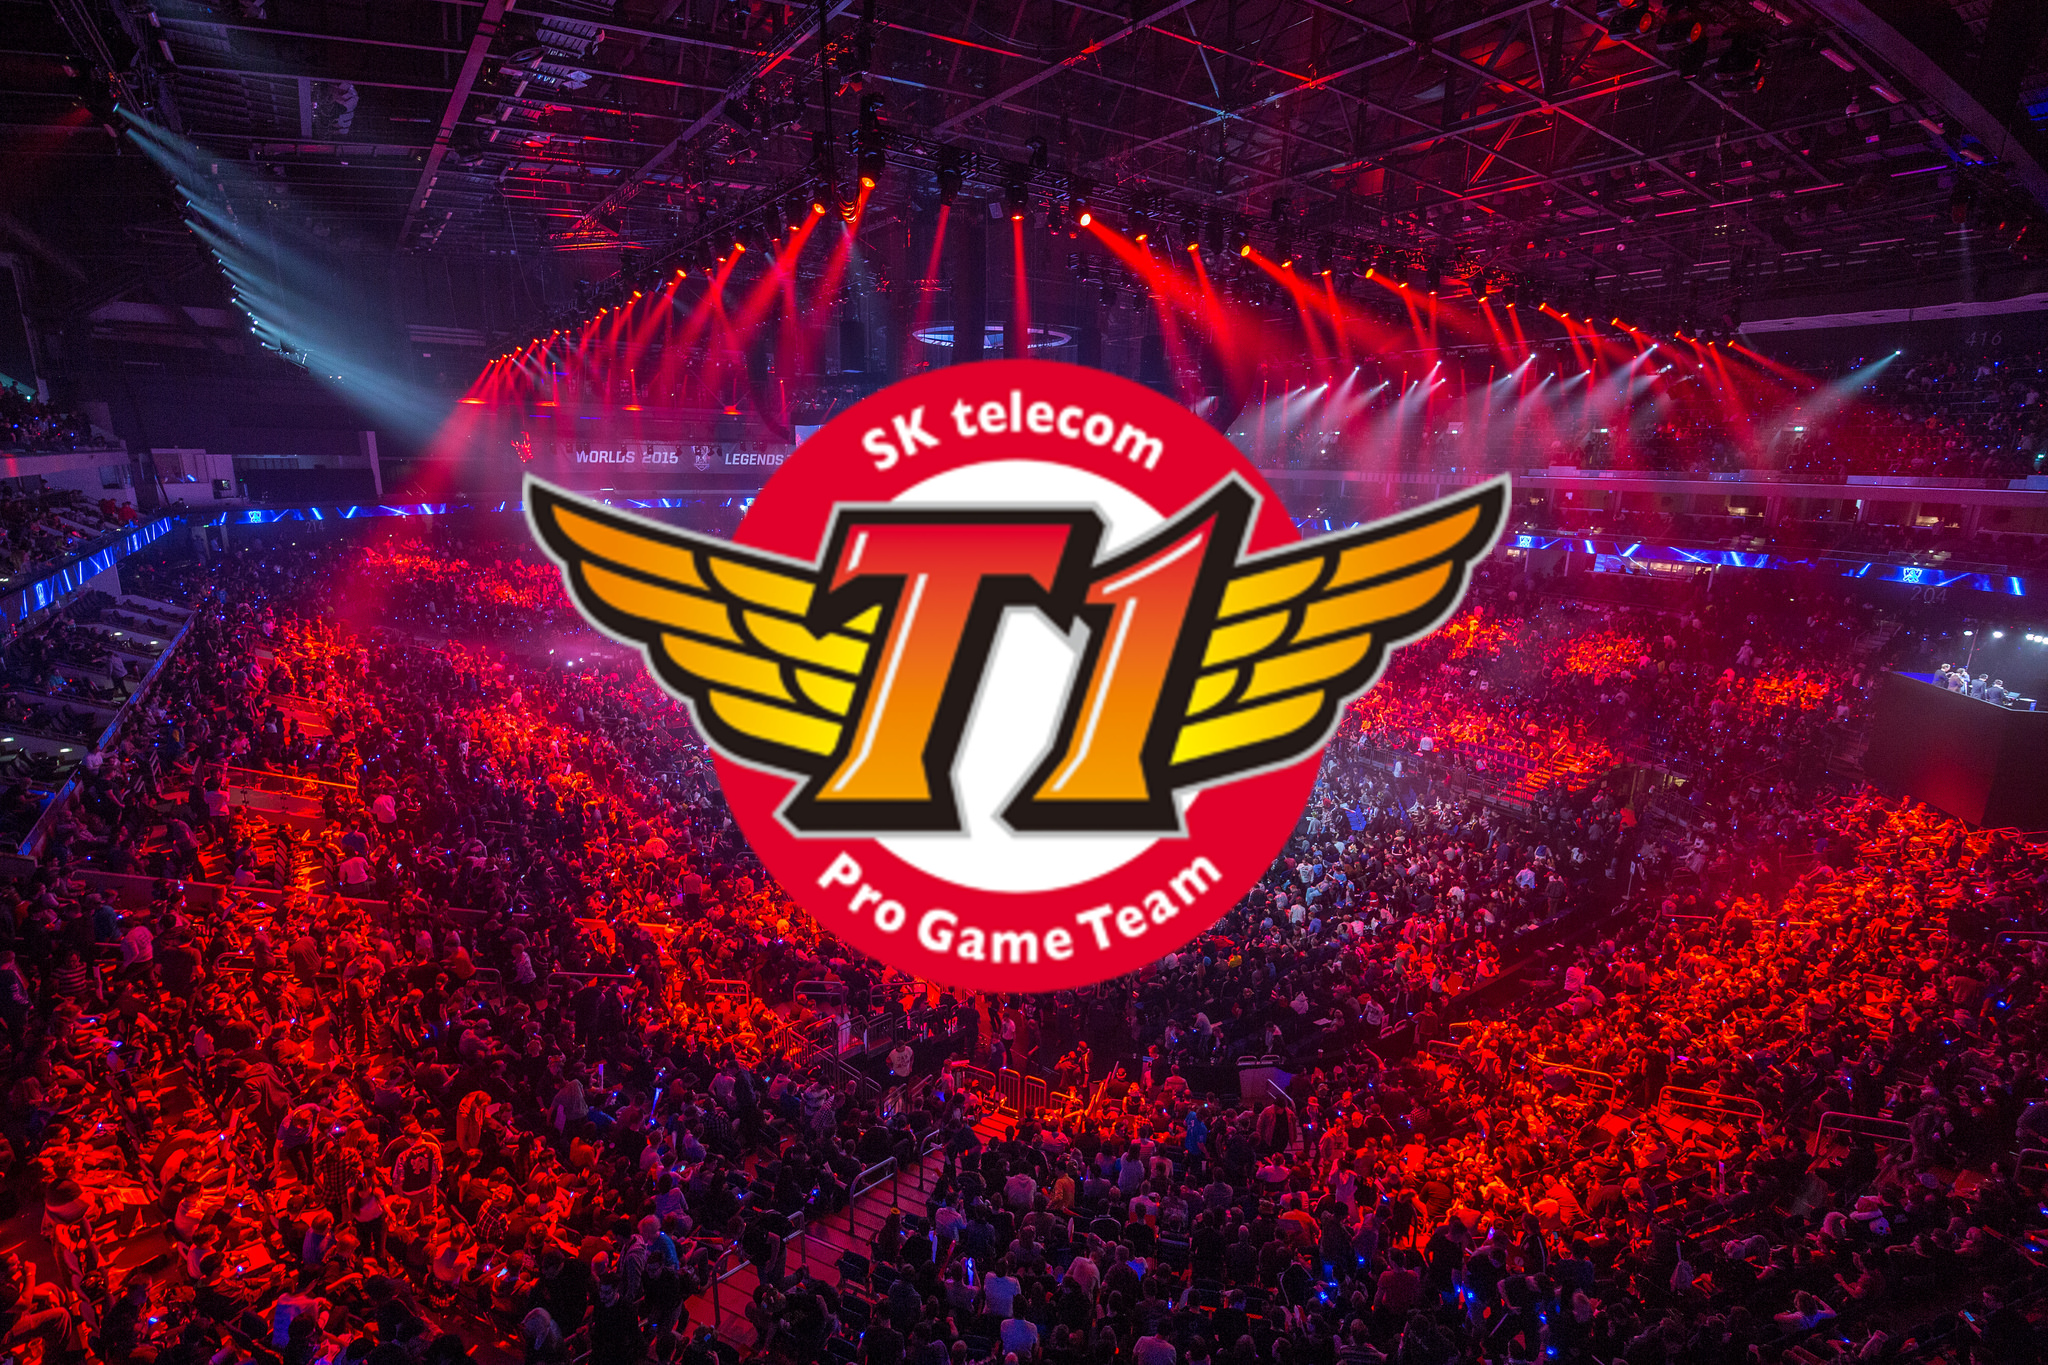 SK Telecom T1 is looking for new League of Legends players | Dot Esports